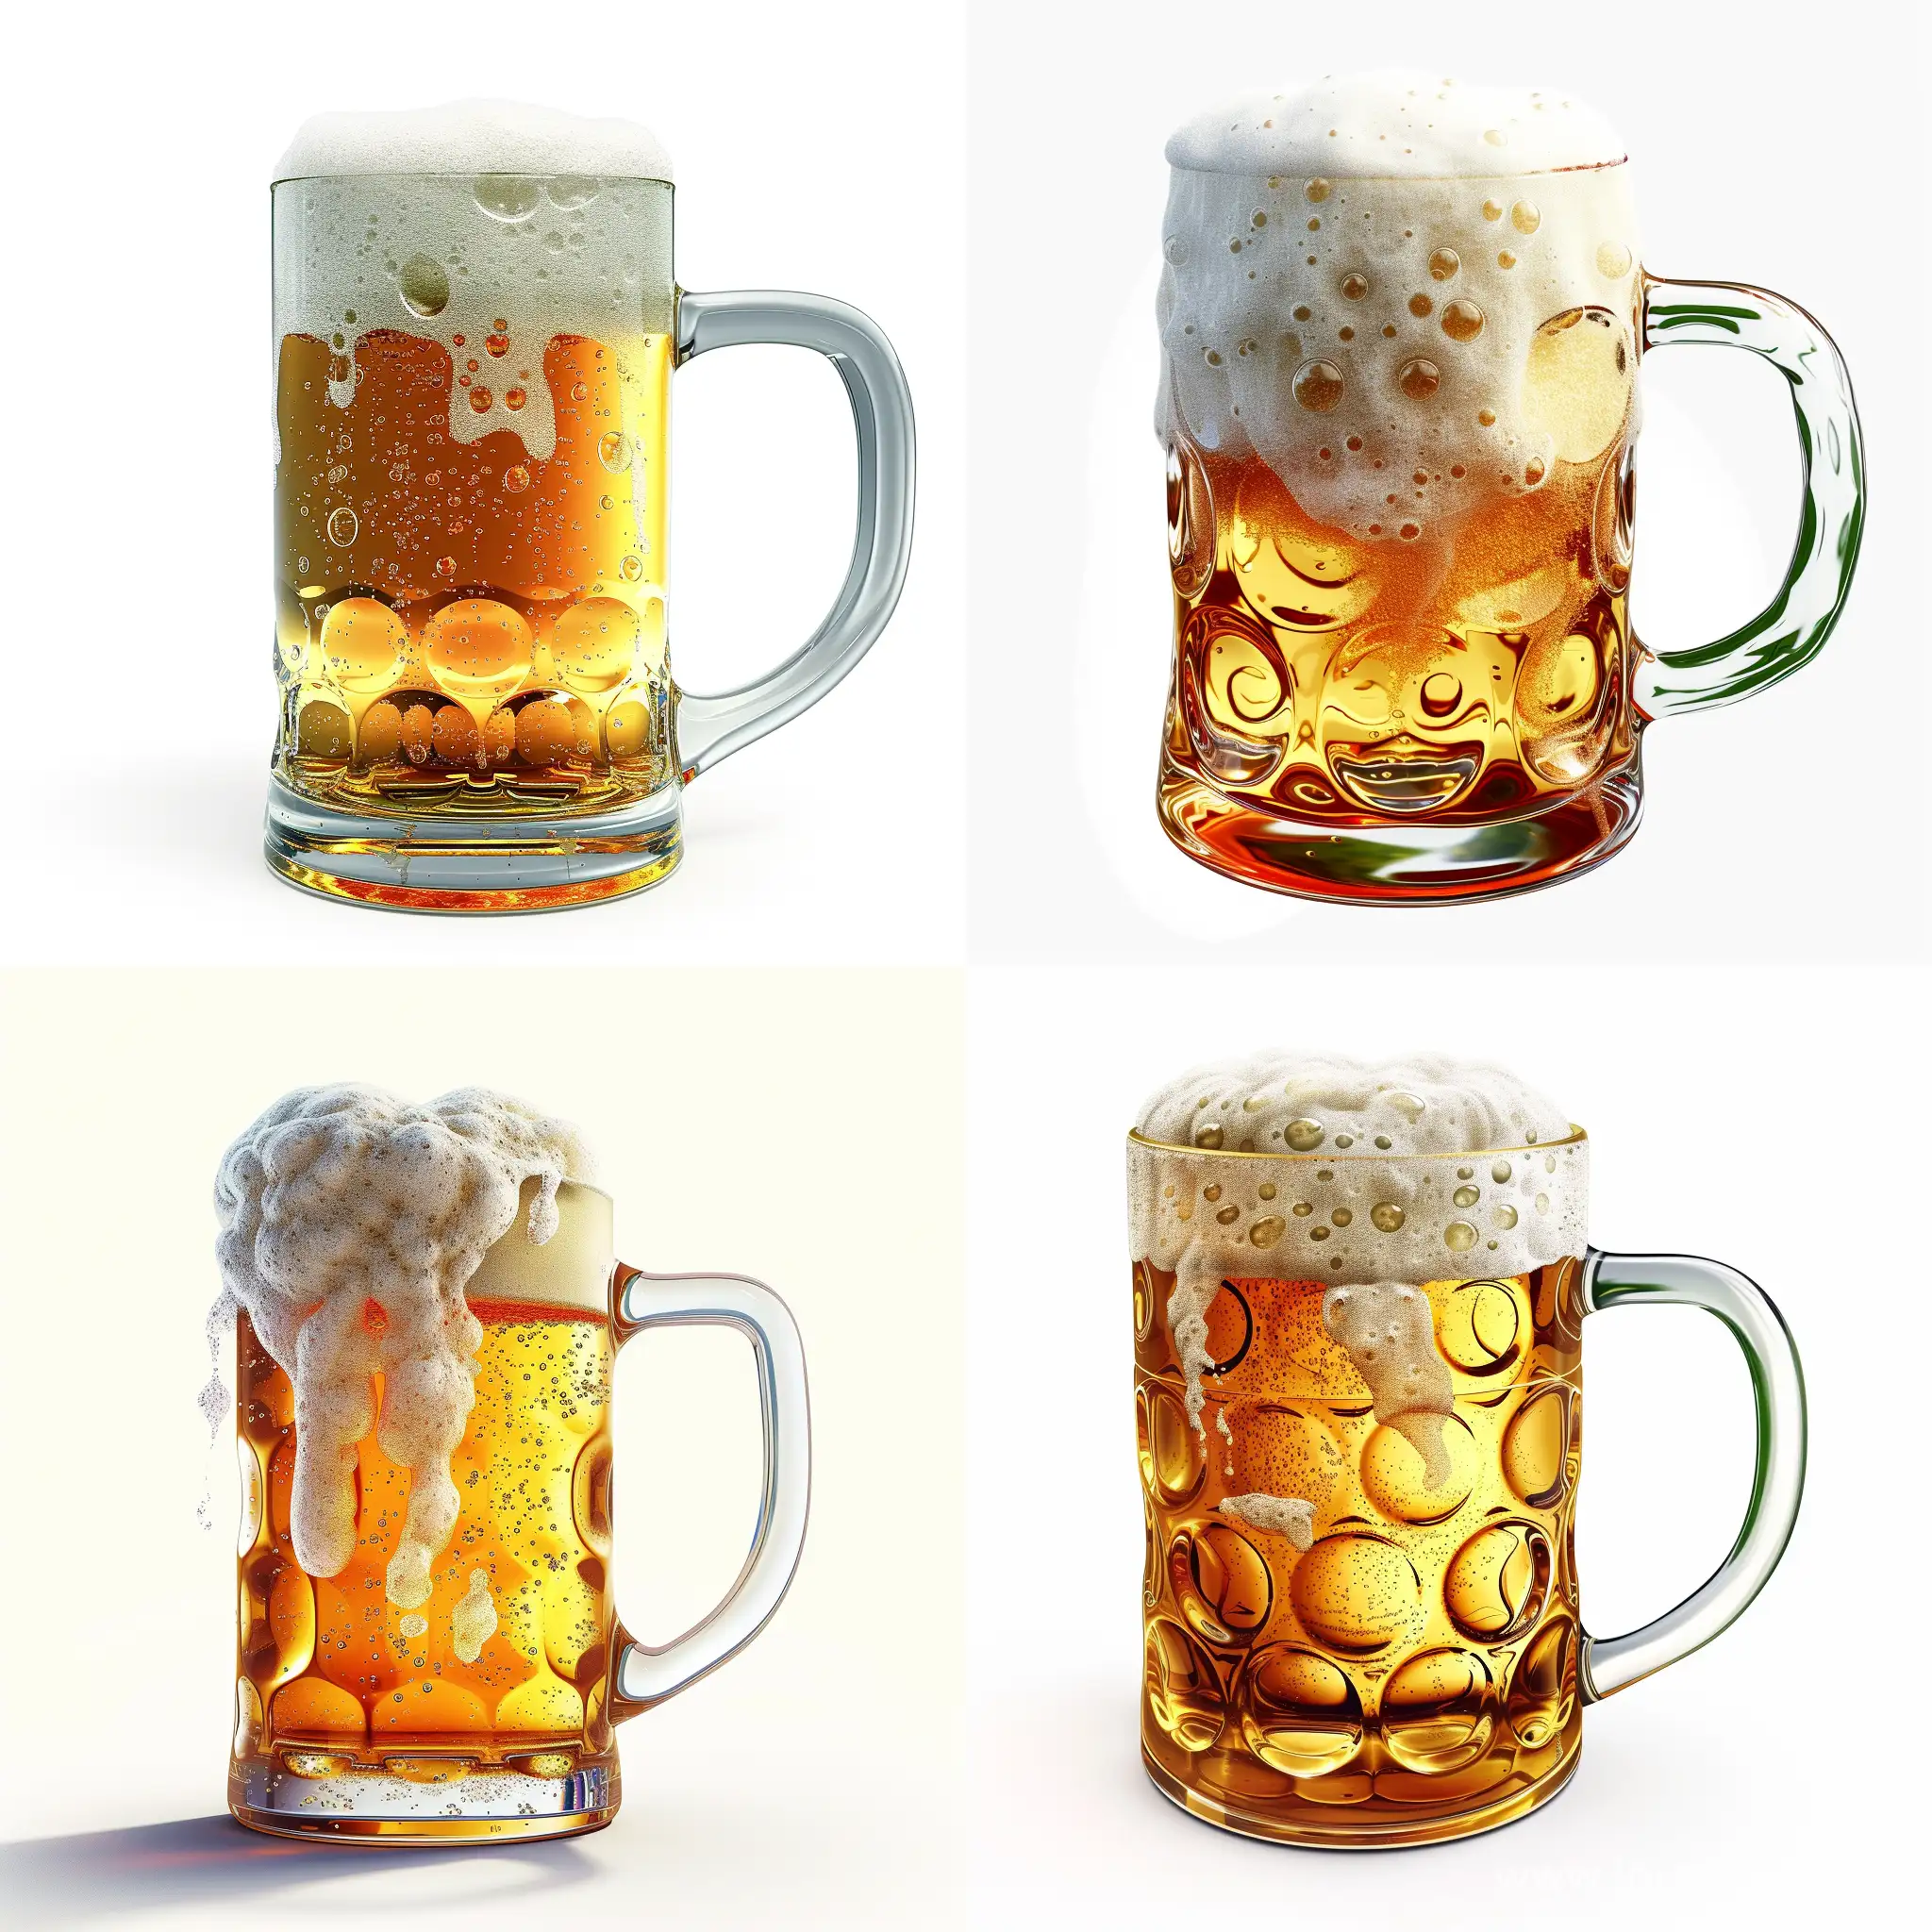 close-up beer mug with foam, digital illustration, high definition, photo realism, solid white background